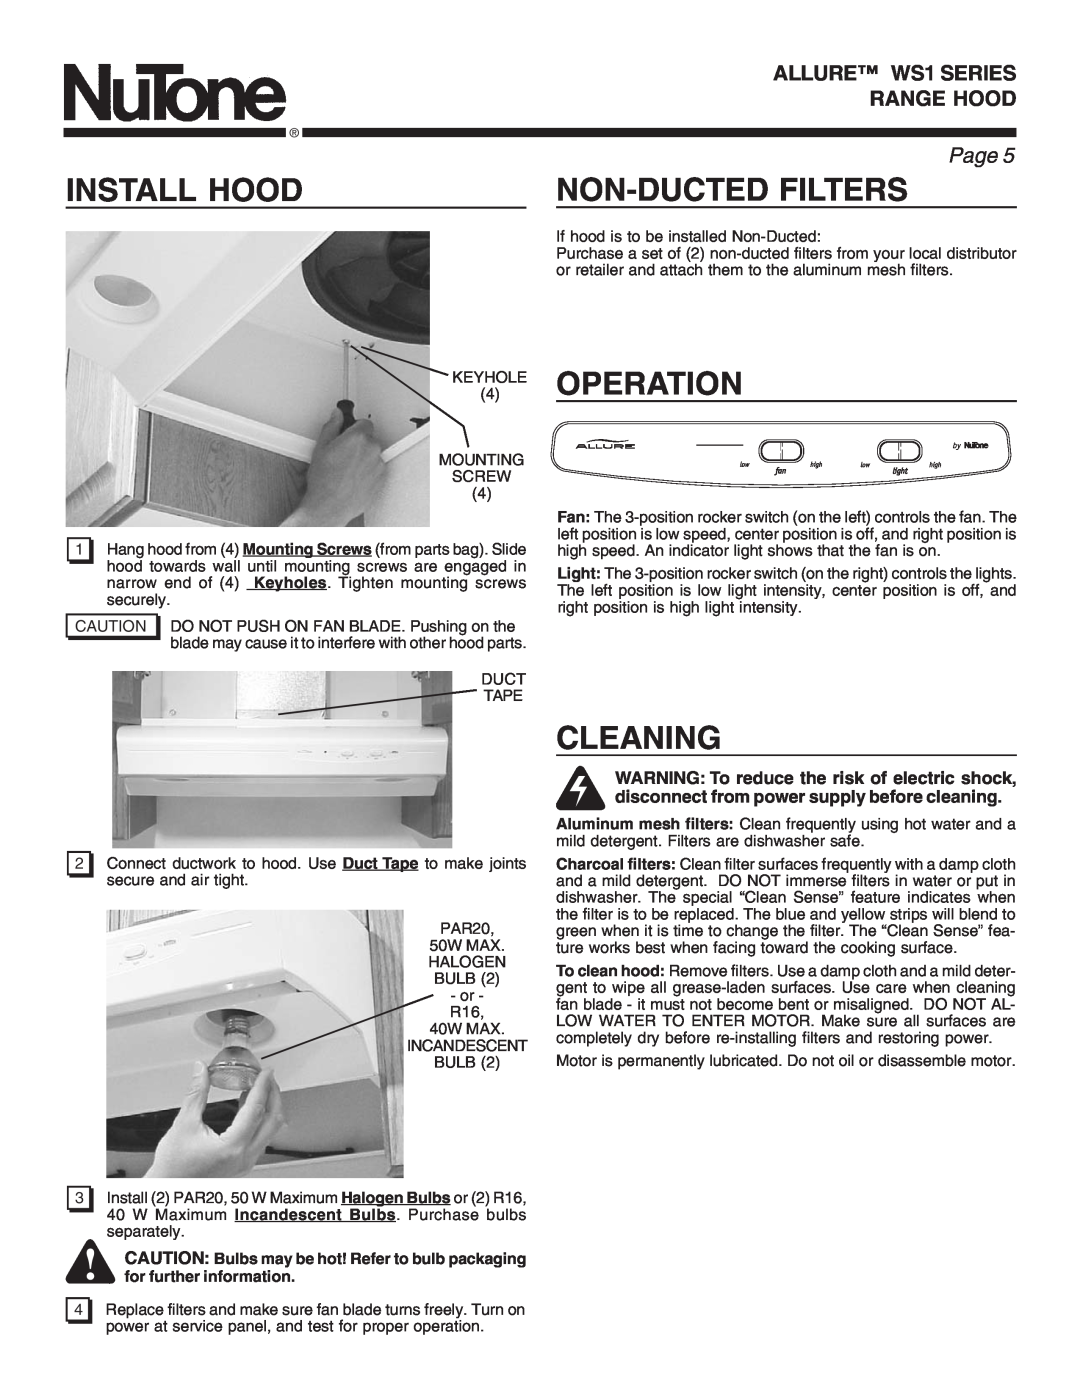 NuTone warranty Install Hood, Operation, Cleaning, Non-Ducted Filters, ALLURE WS1 SERIES, Range Hood, Page 